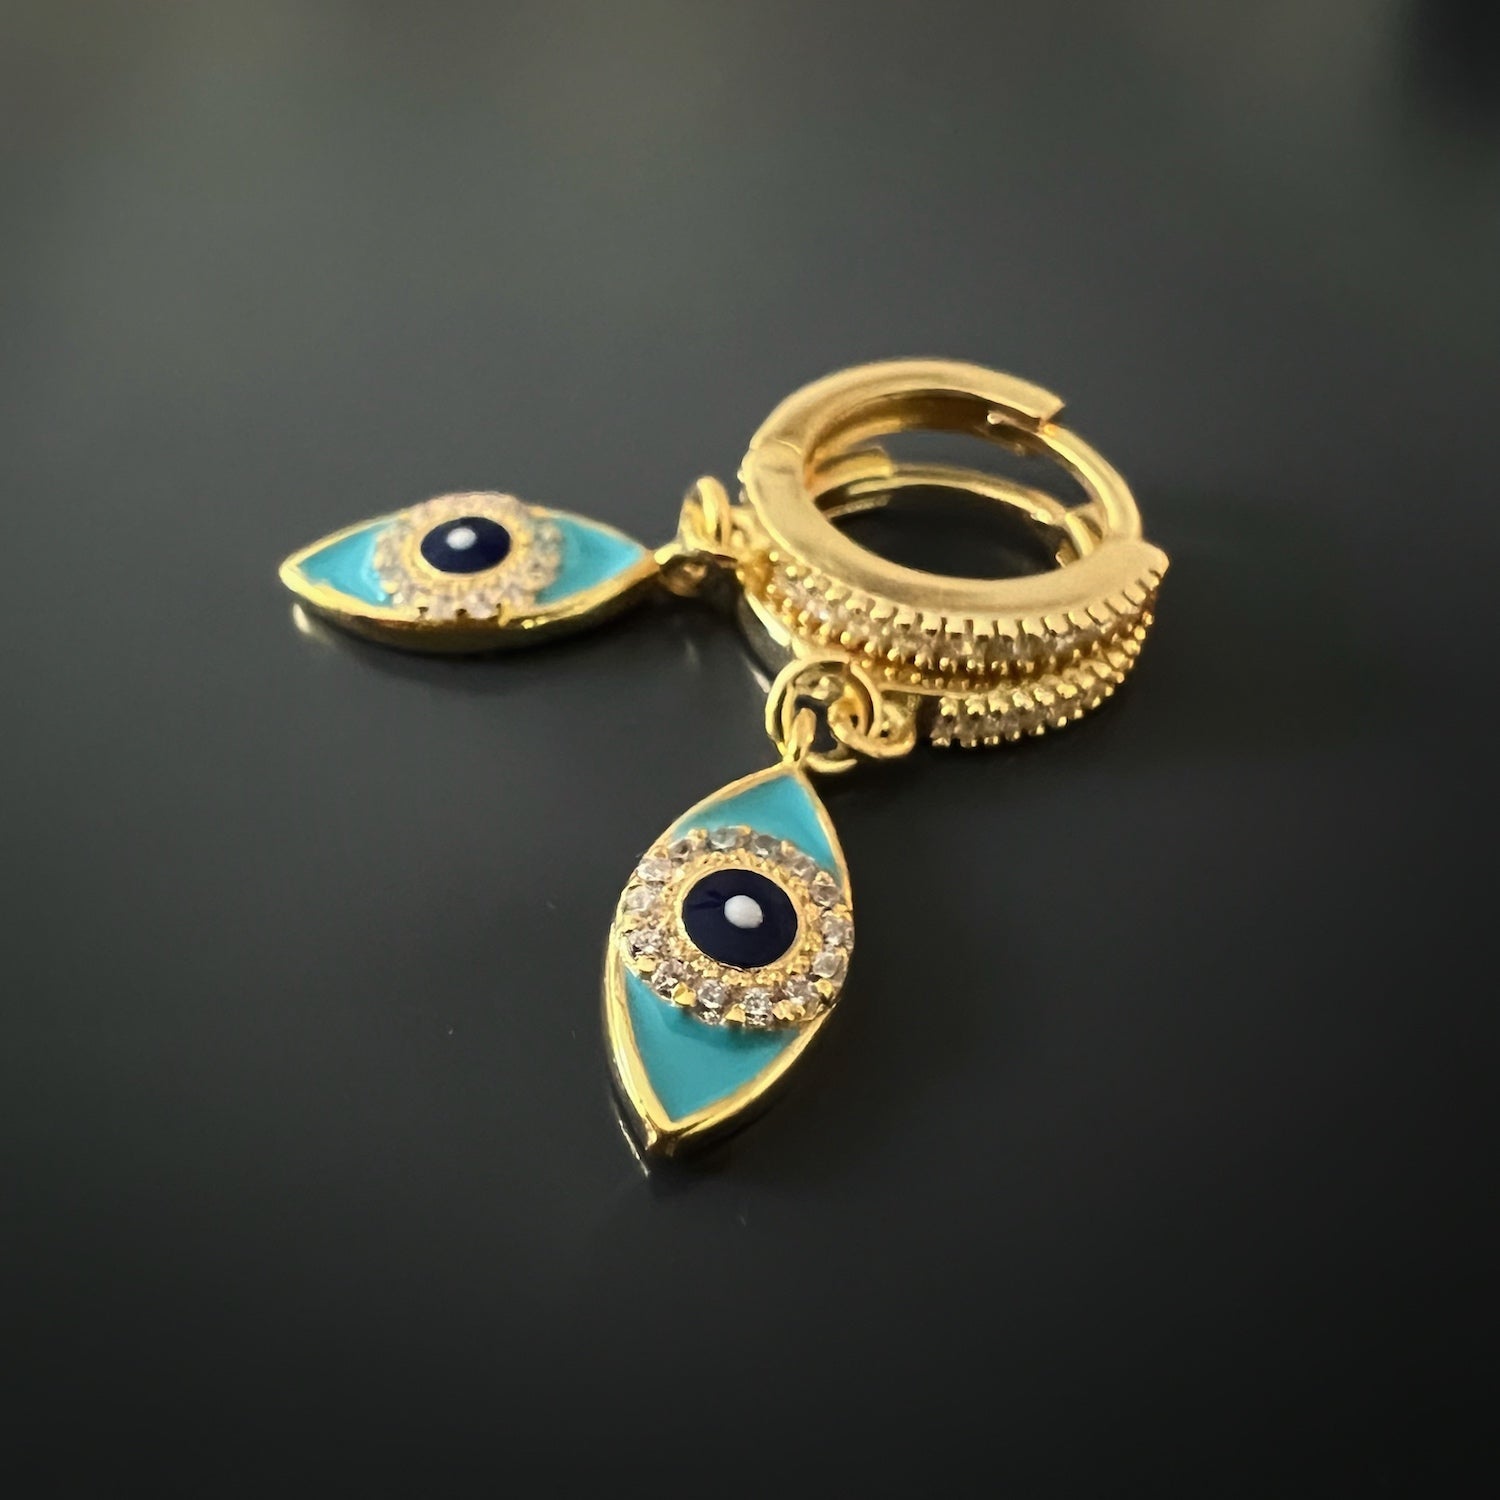 Eye-catching Turquoise Sparkly Gold Evil Eye Earrings with intricate details